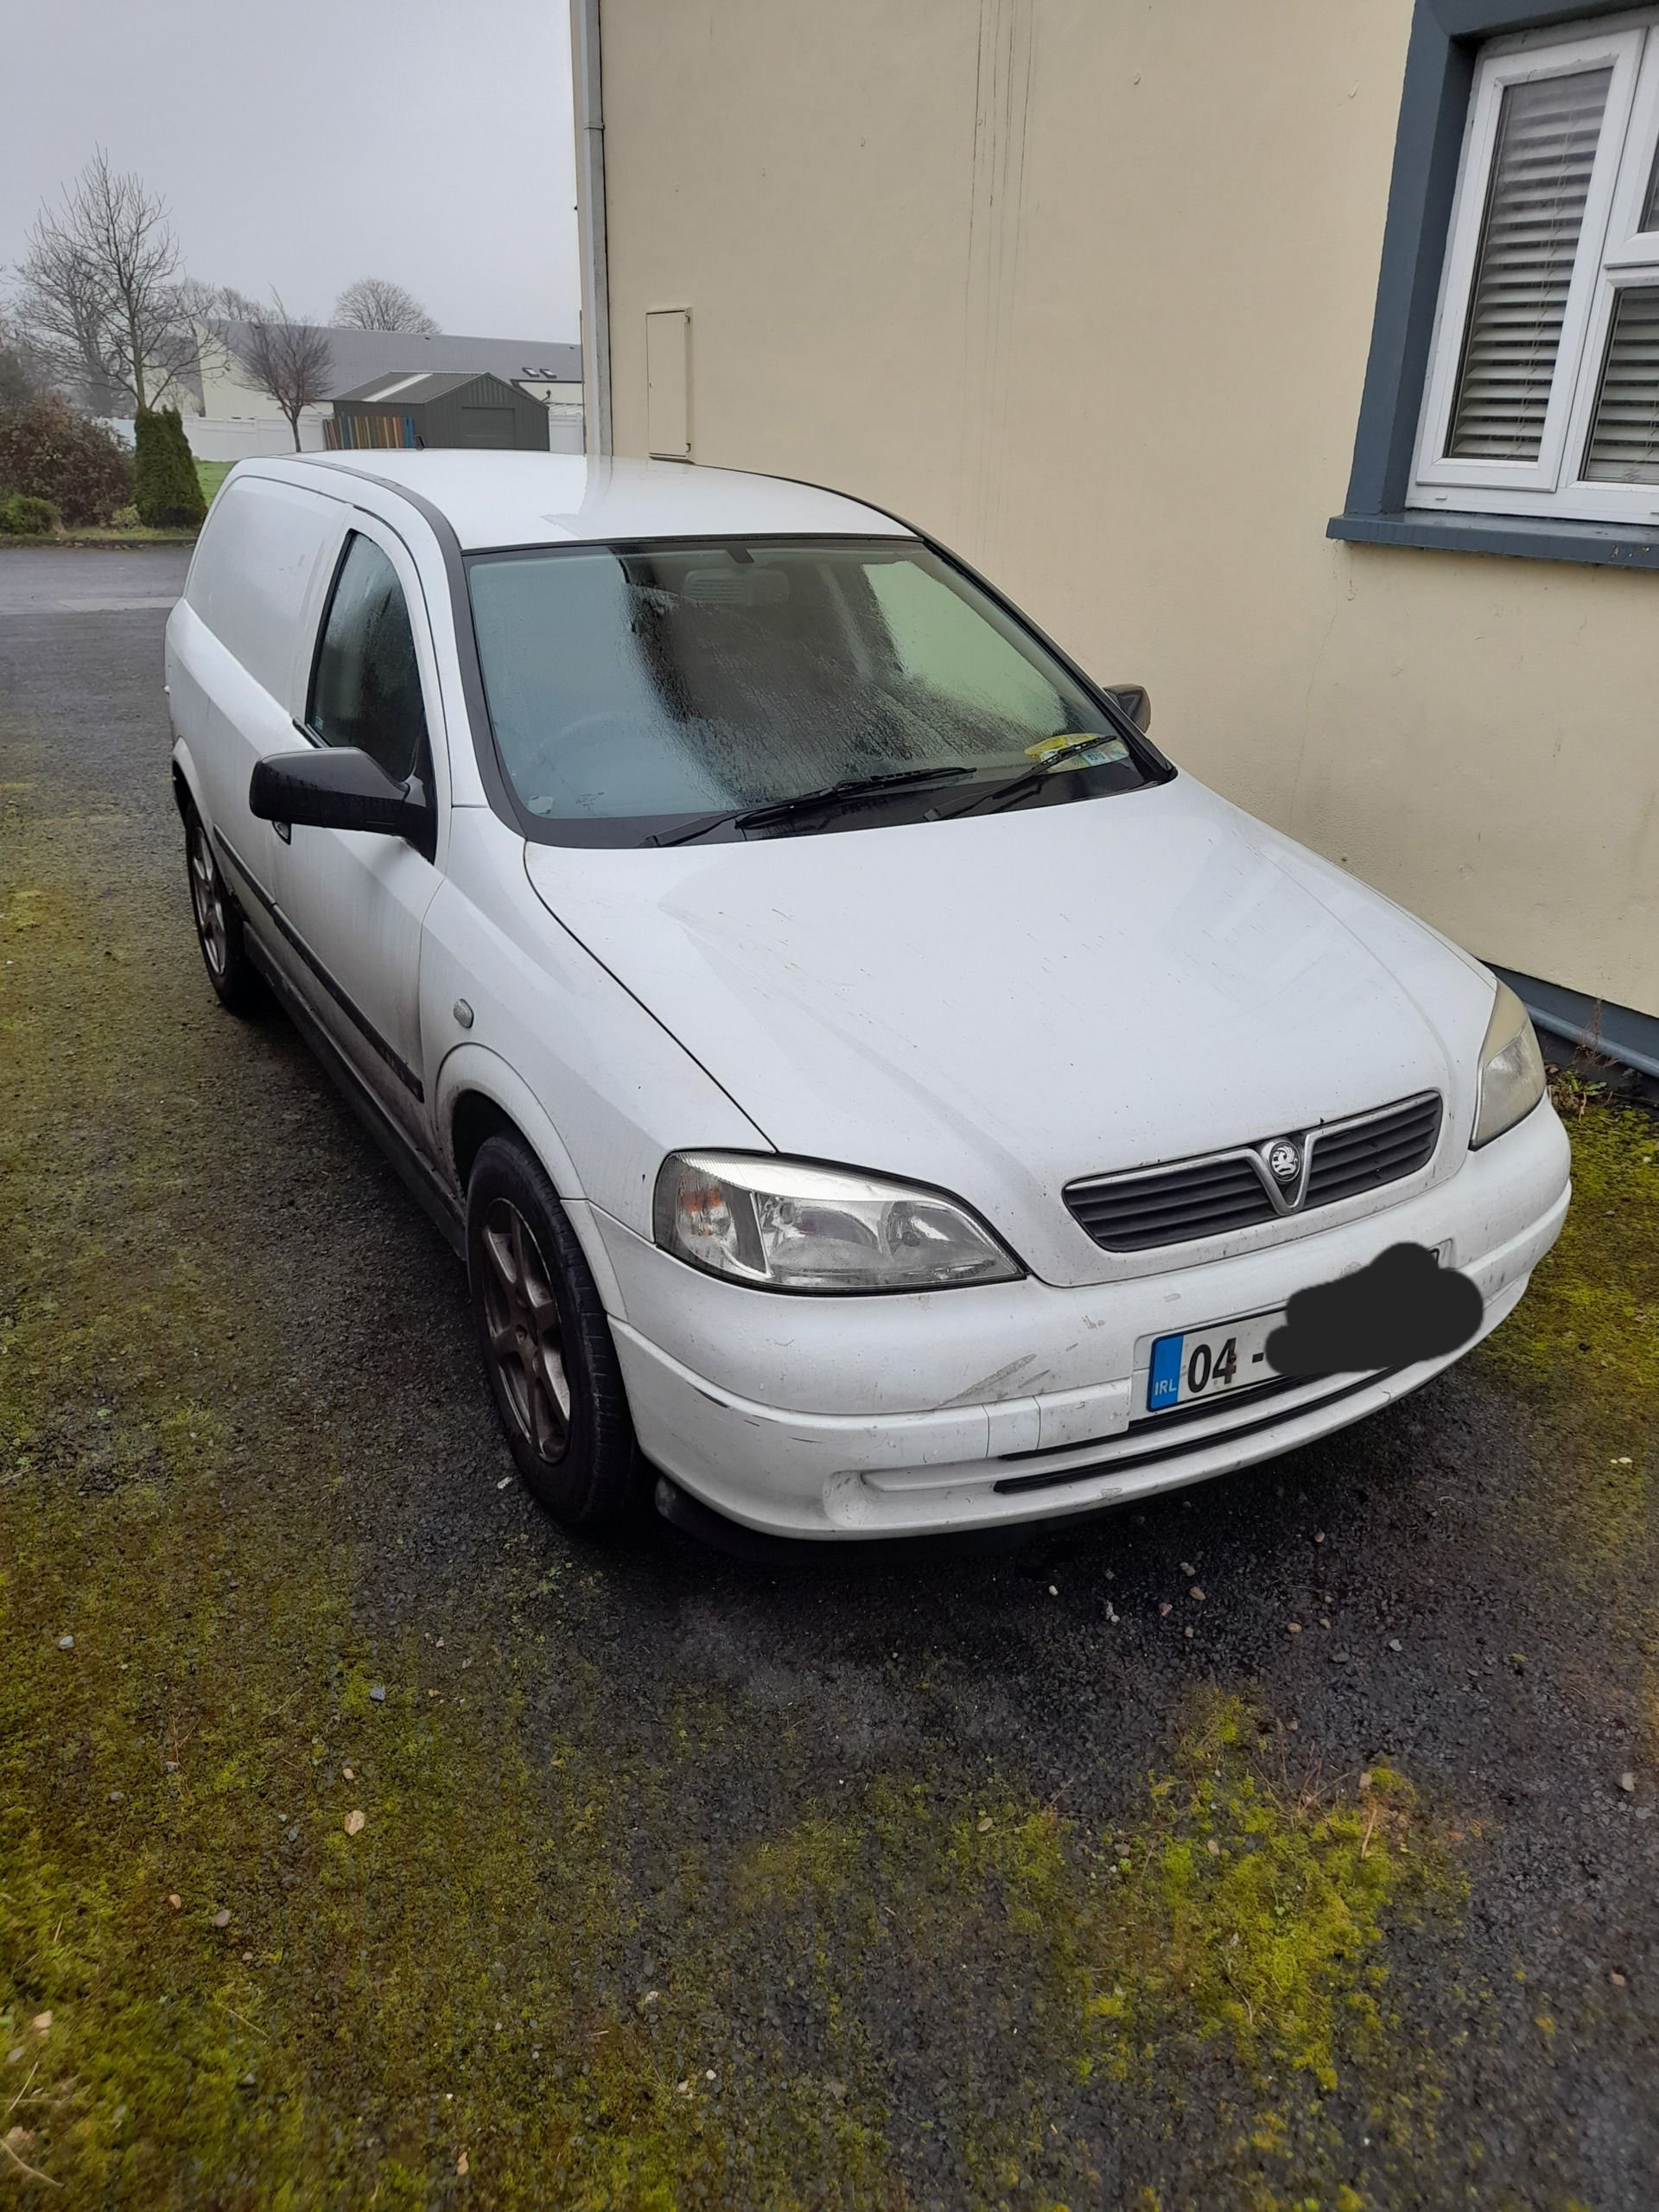 Used Vauxhall Astra 2004 in Clare